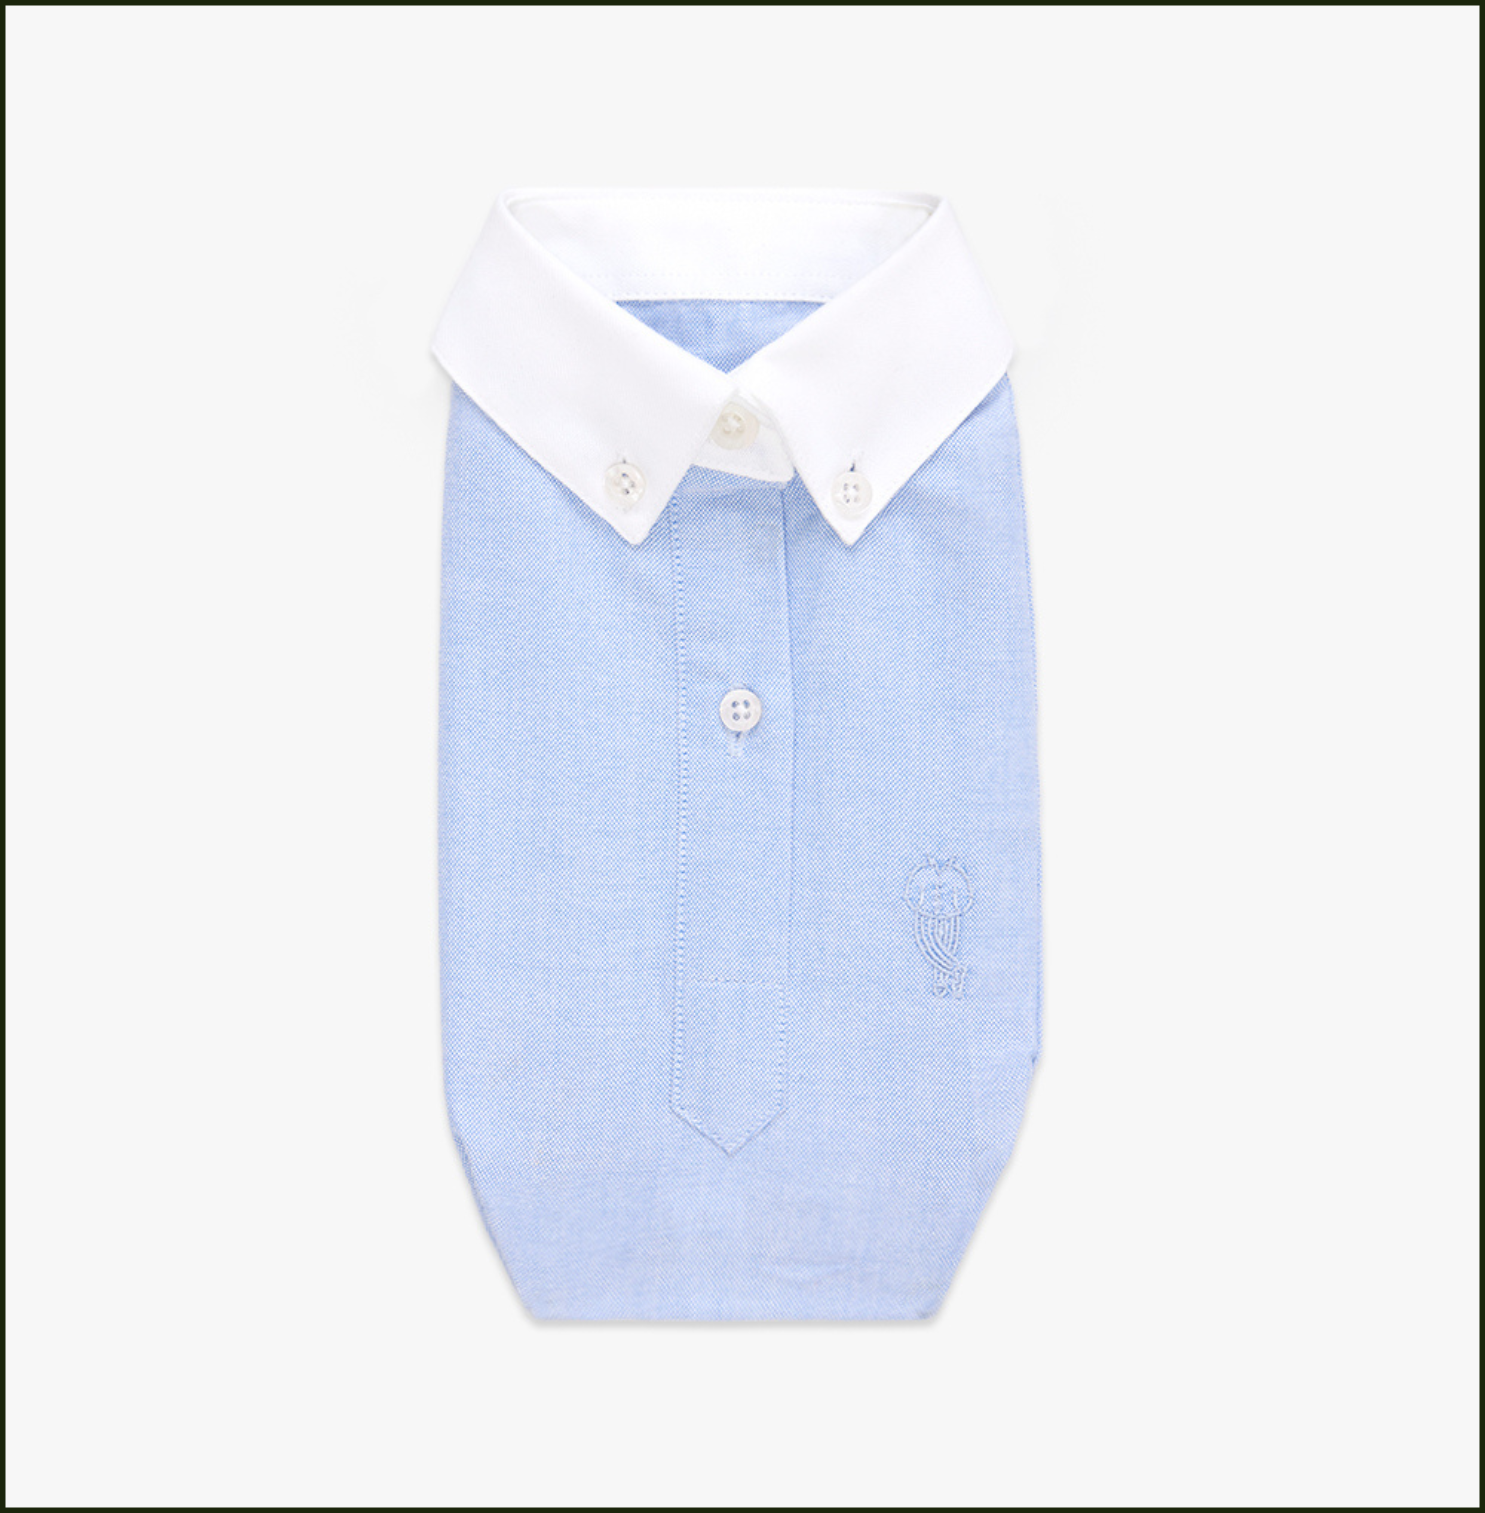 Contrast Collar Oxford Shirt (Limited Edition Wine Cover)